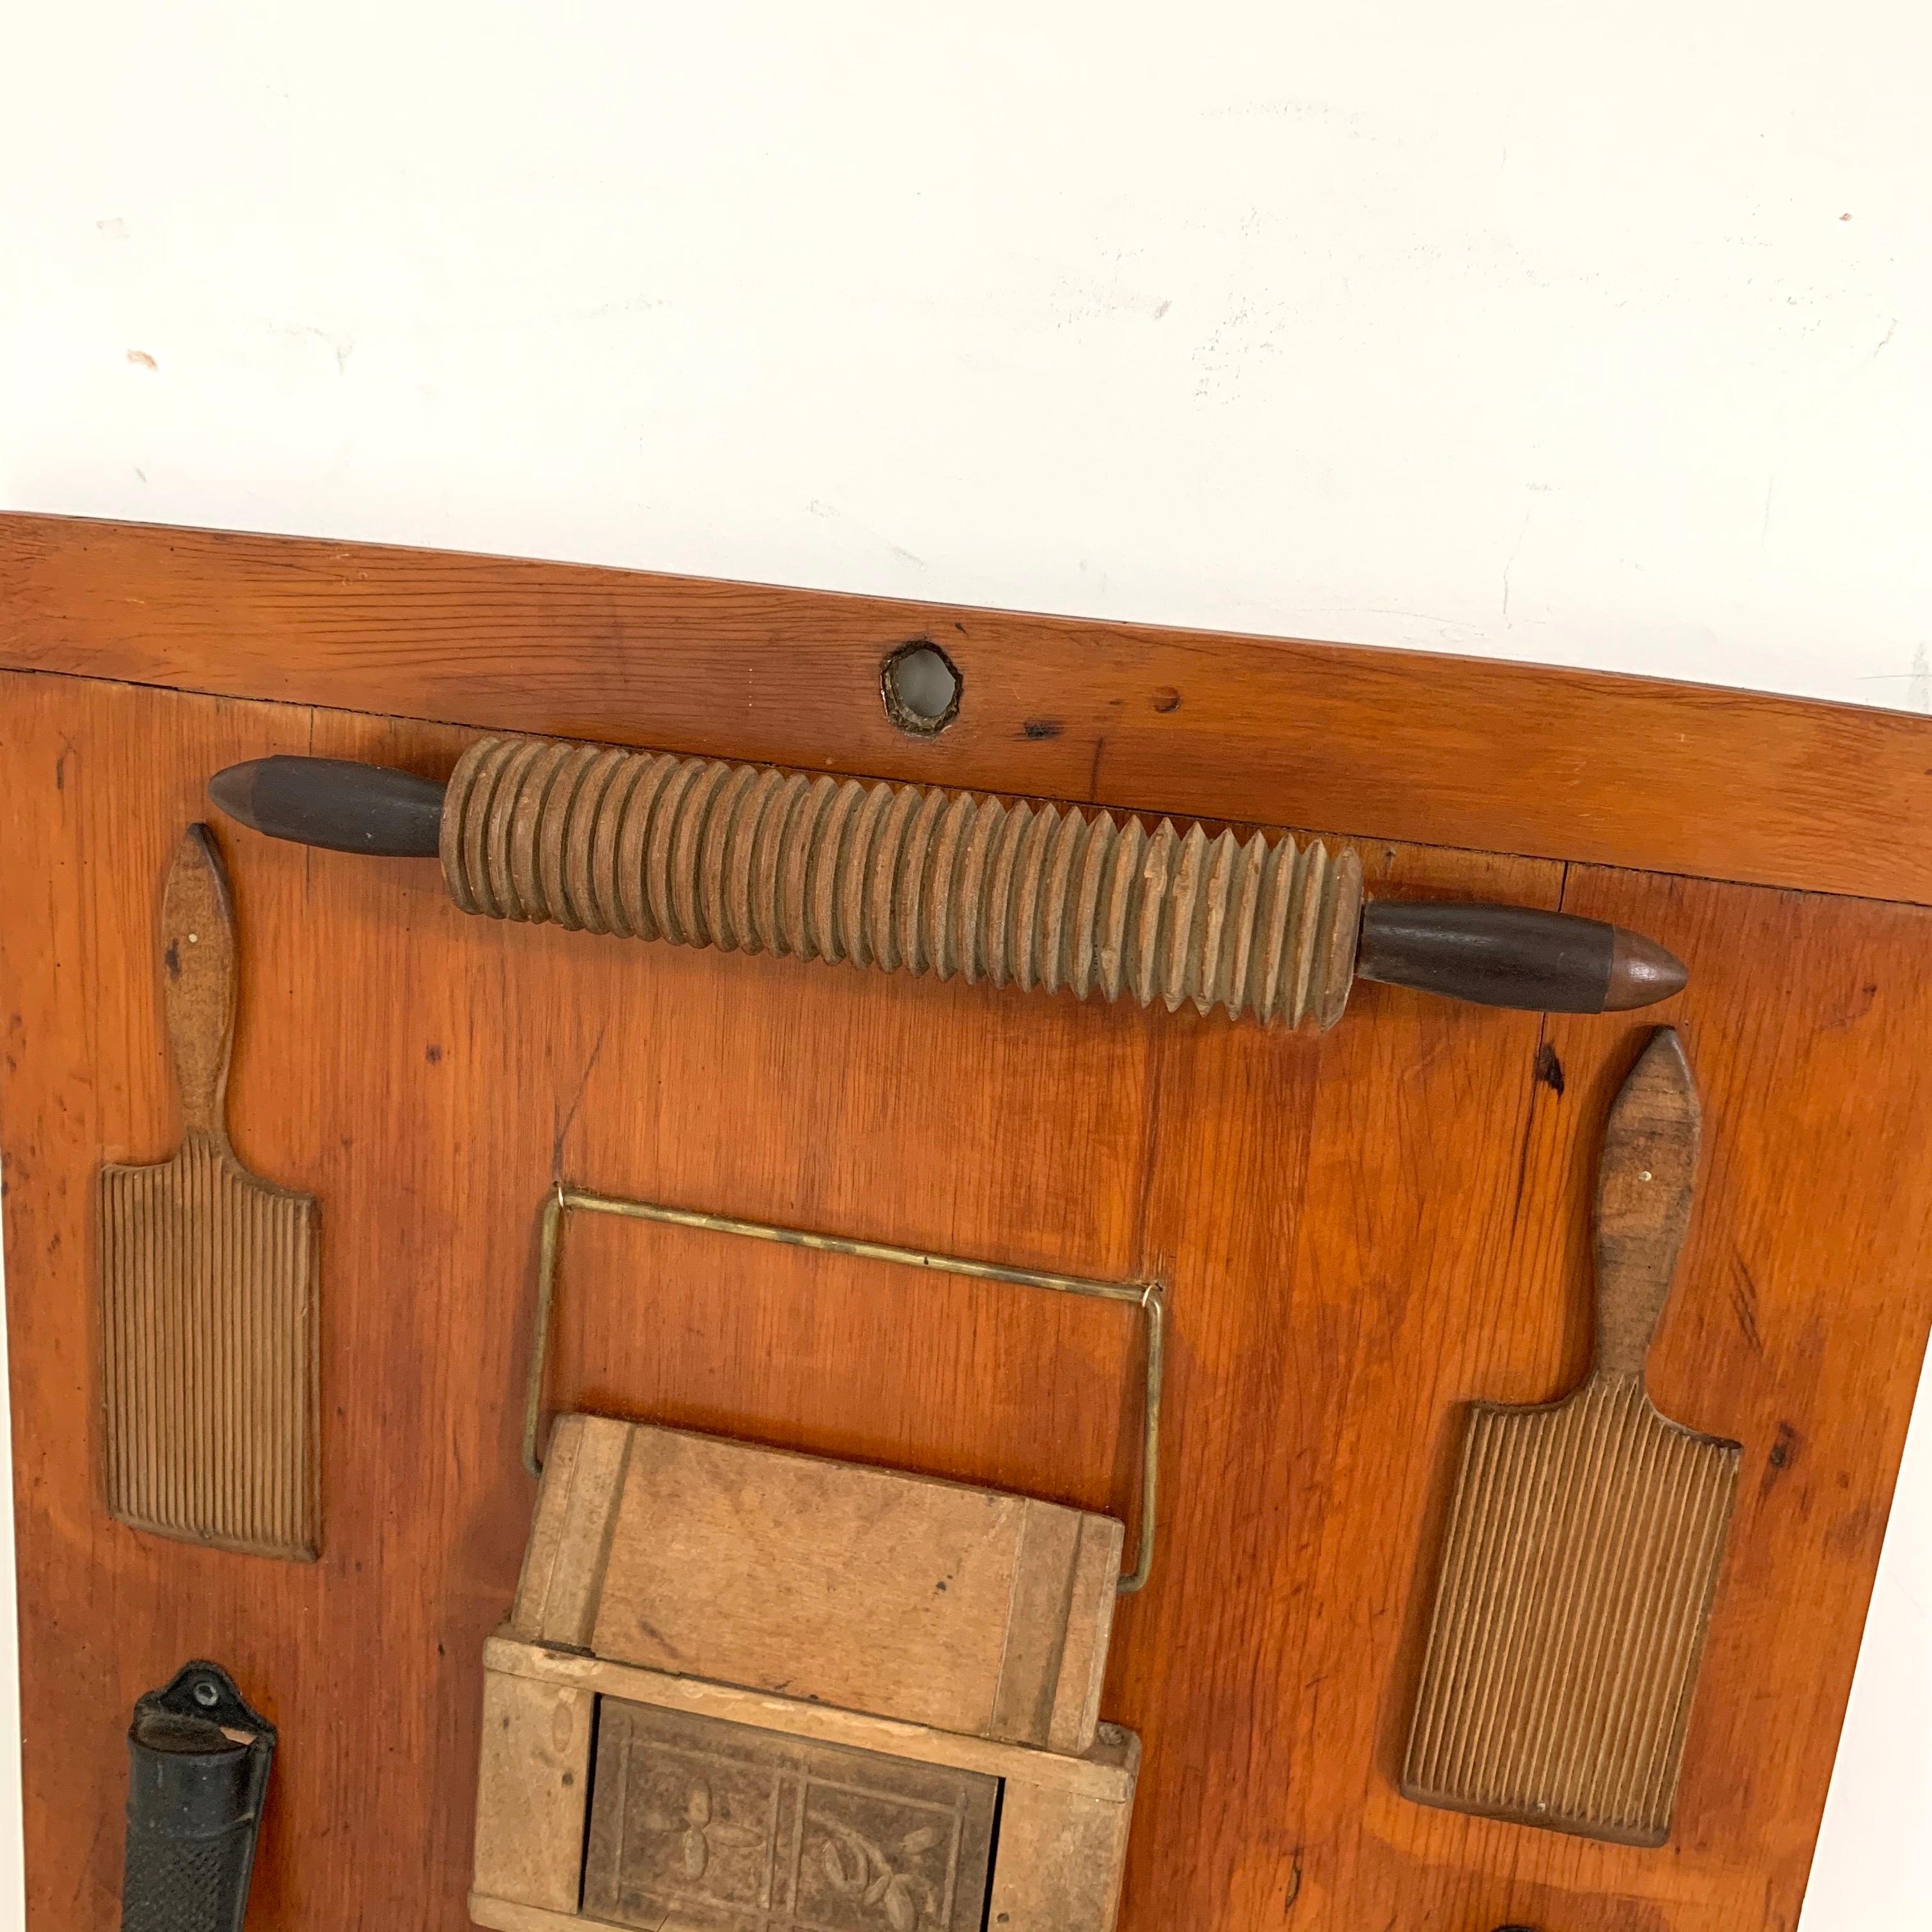 A charming sculptural modernist wall display of various 18th and 19th century tools relating to the art of baking, all mounted upon an antique breadboard. Signed on reverse “Virgil Sumner“ and dated 1949. At top are a pair of butter paddles, a three